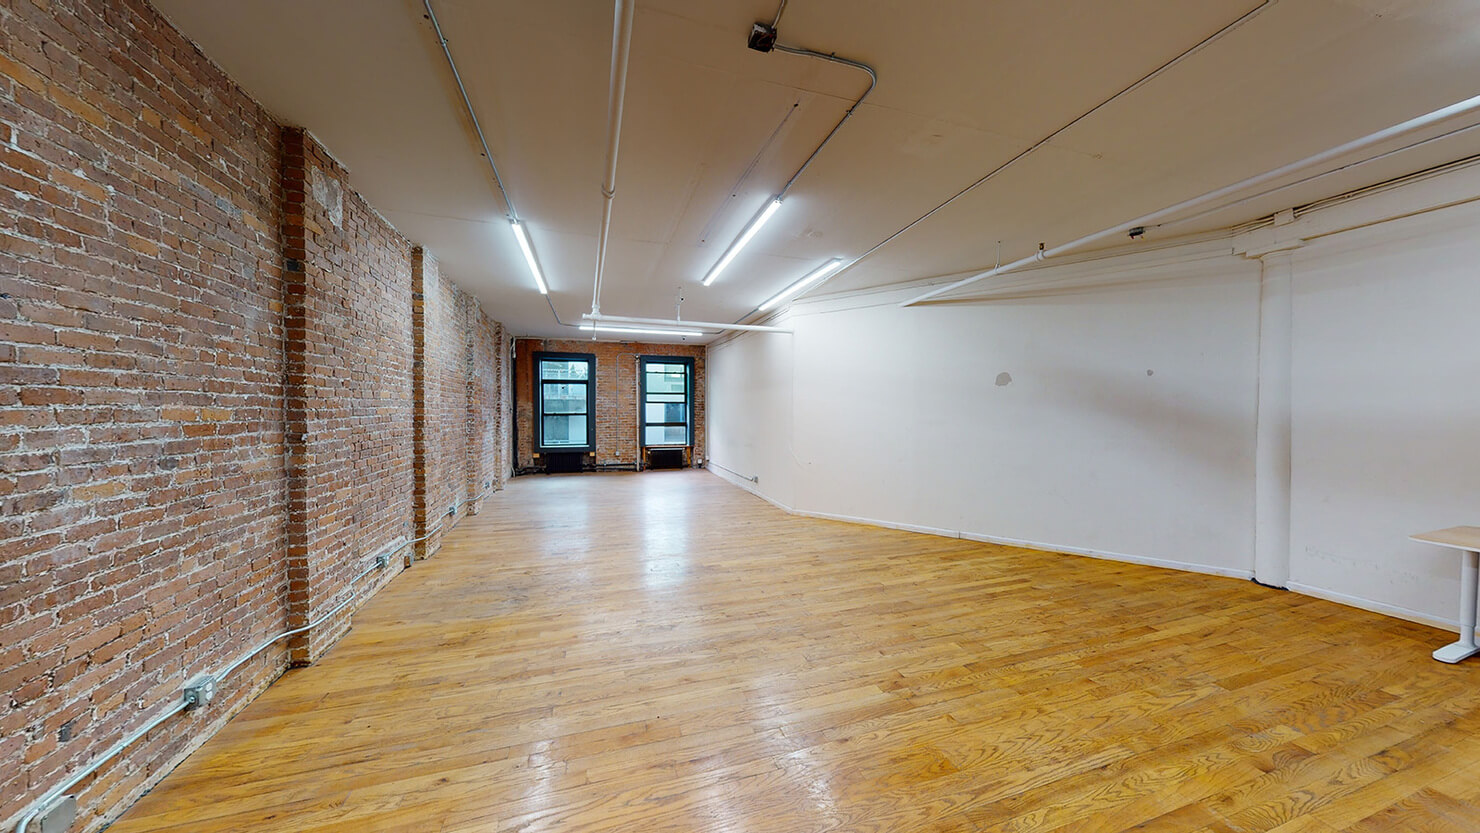 39 West 14th Street Office Space - Large Gallery Space